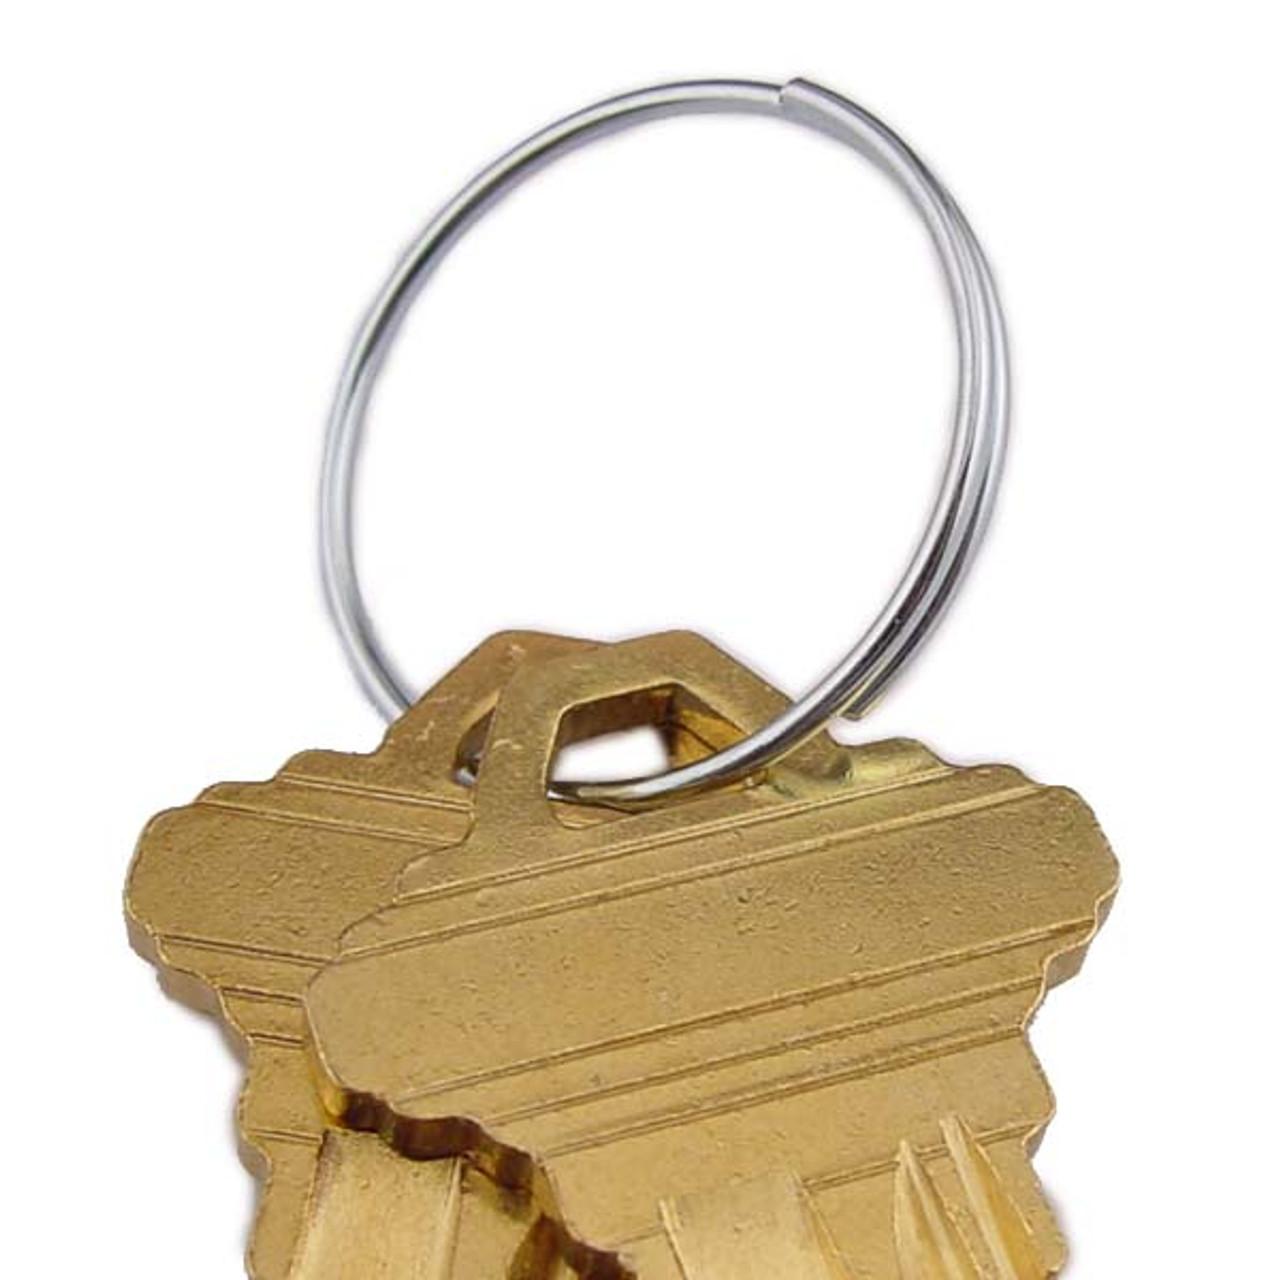 Shop for and Buy Plain Wire Key Ring 1 Inch-Bulk Pack of 1000 at .  Large selection and bulk discounts available.